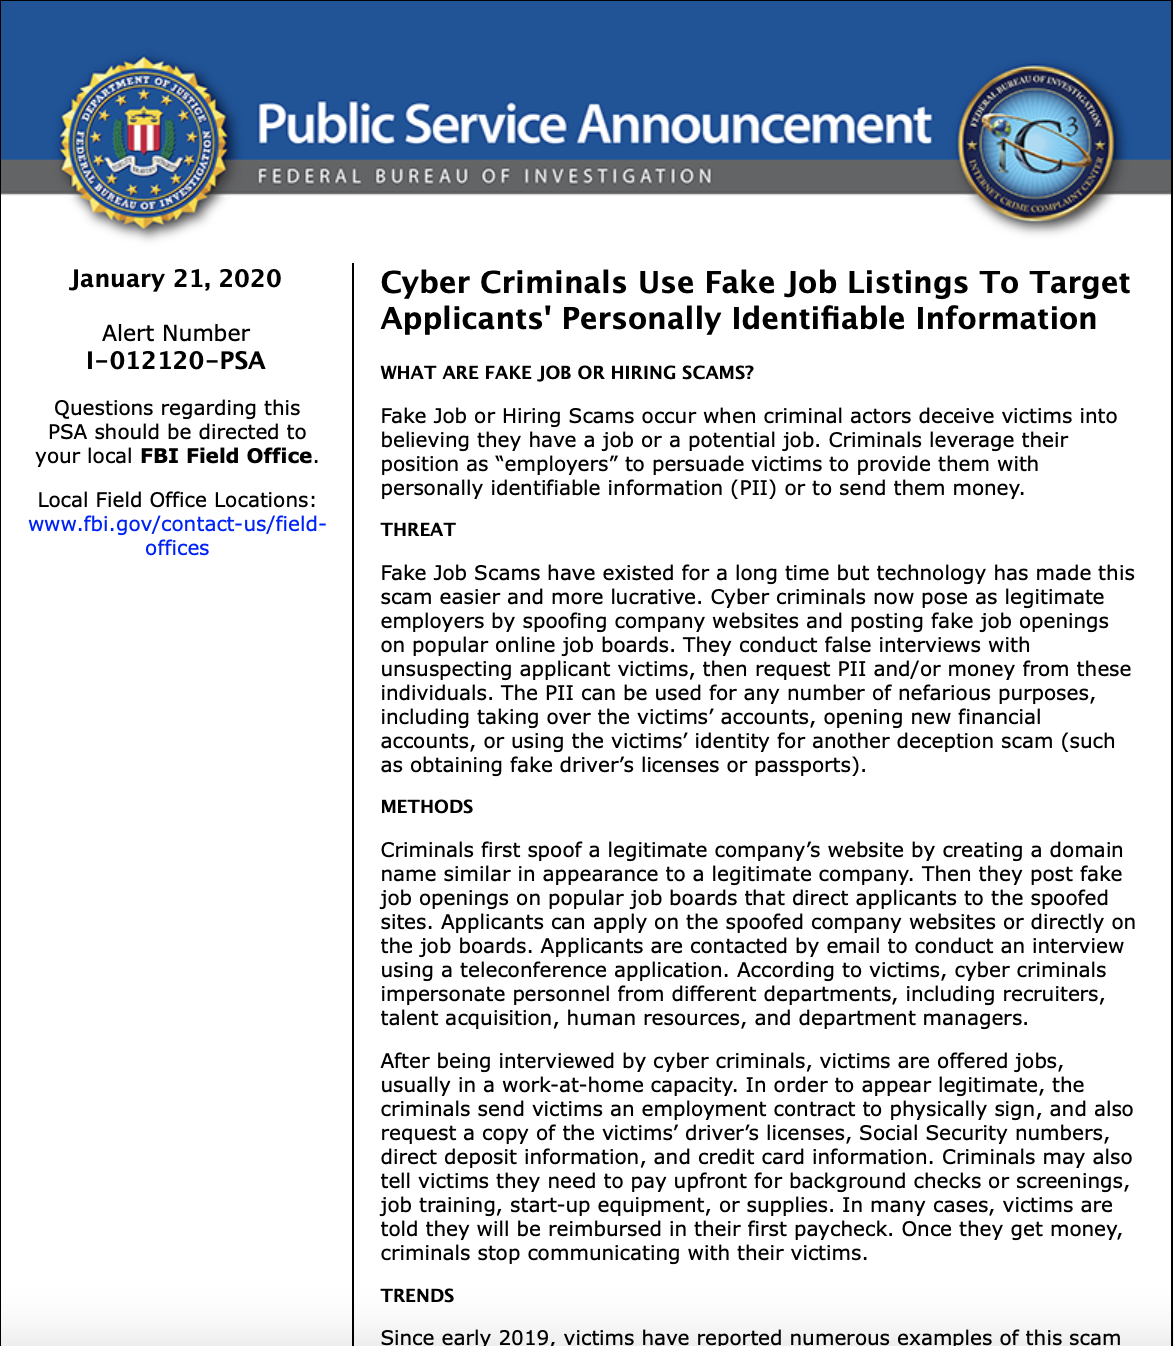 FBI PSA: Cyber Criminals Use Fake Job Listings To Target Applicants' Personally Identifiable Information